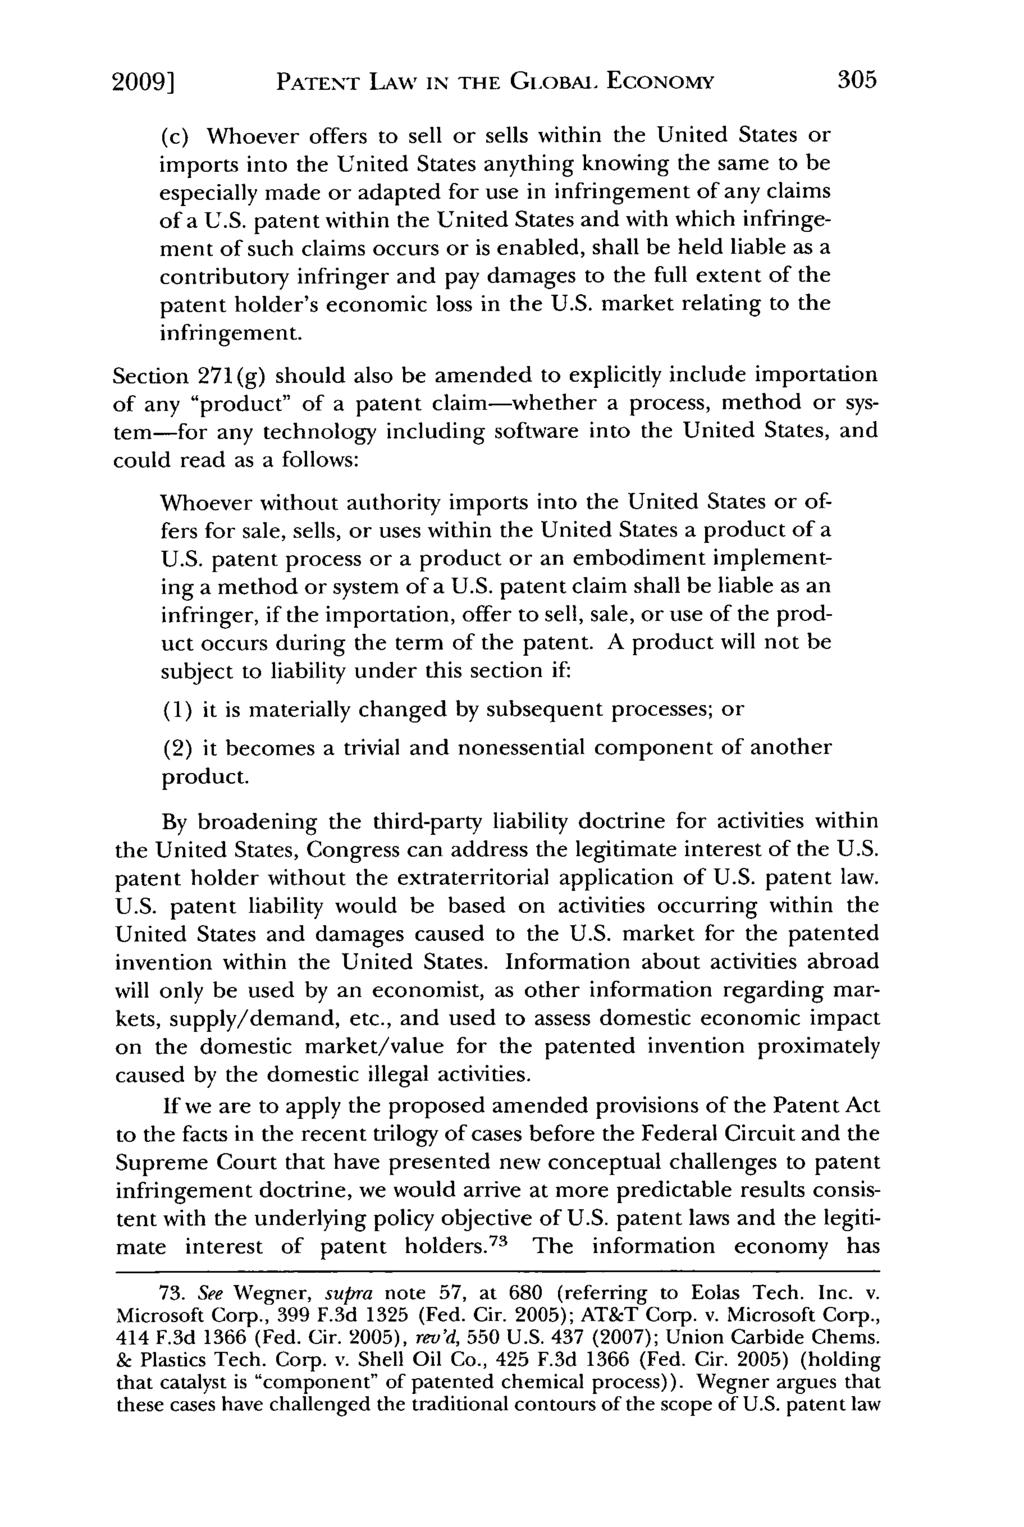 2009] Keyhani: Patent Law in the Global Economy: A Modest Proposal for U.S.